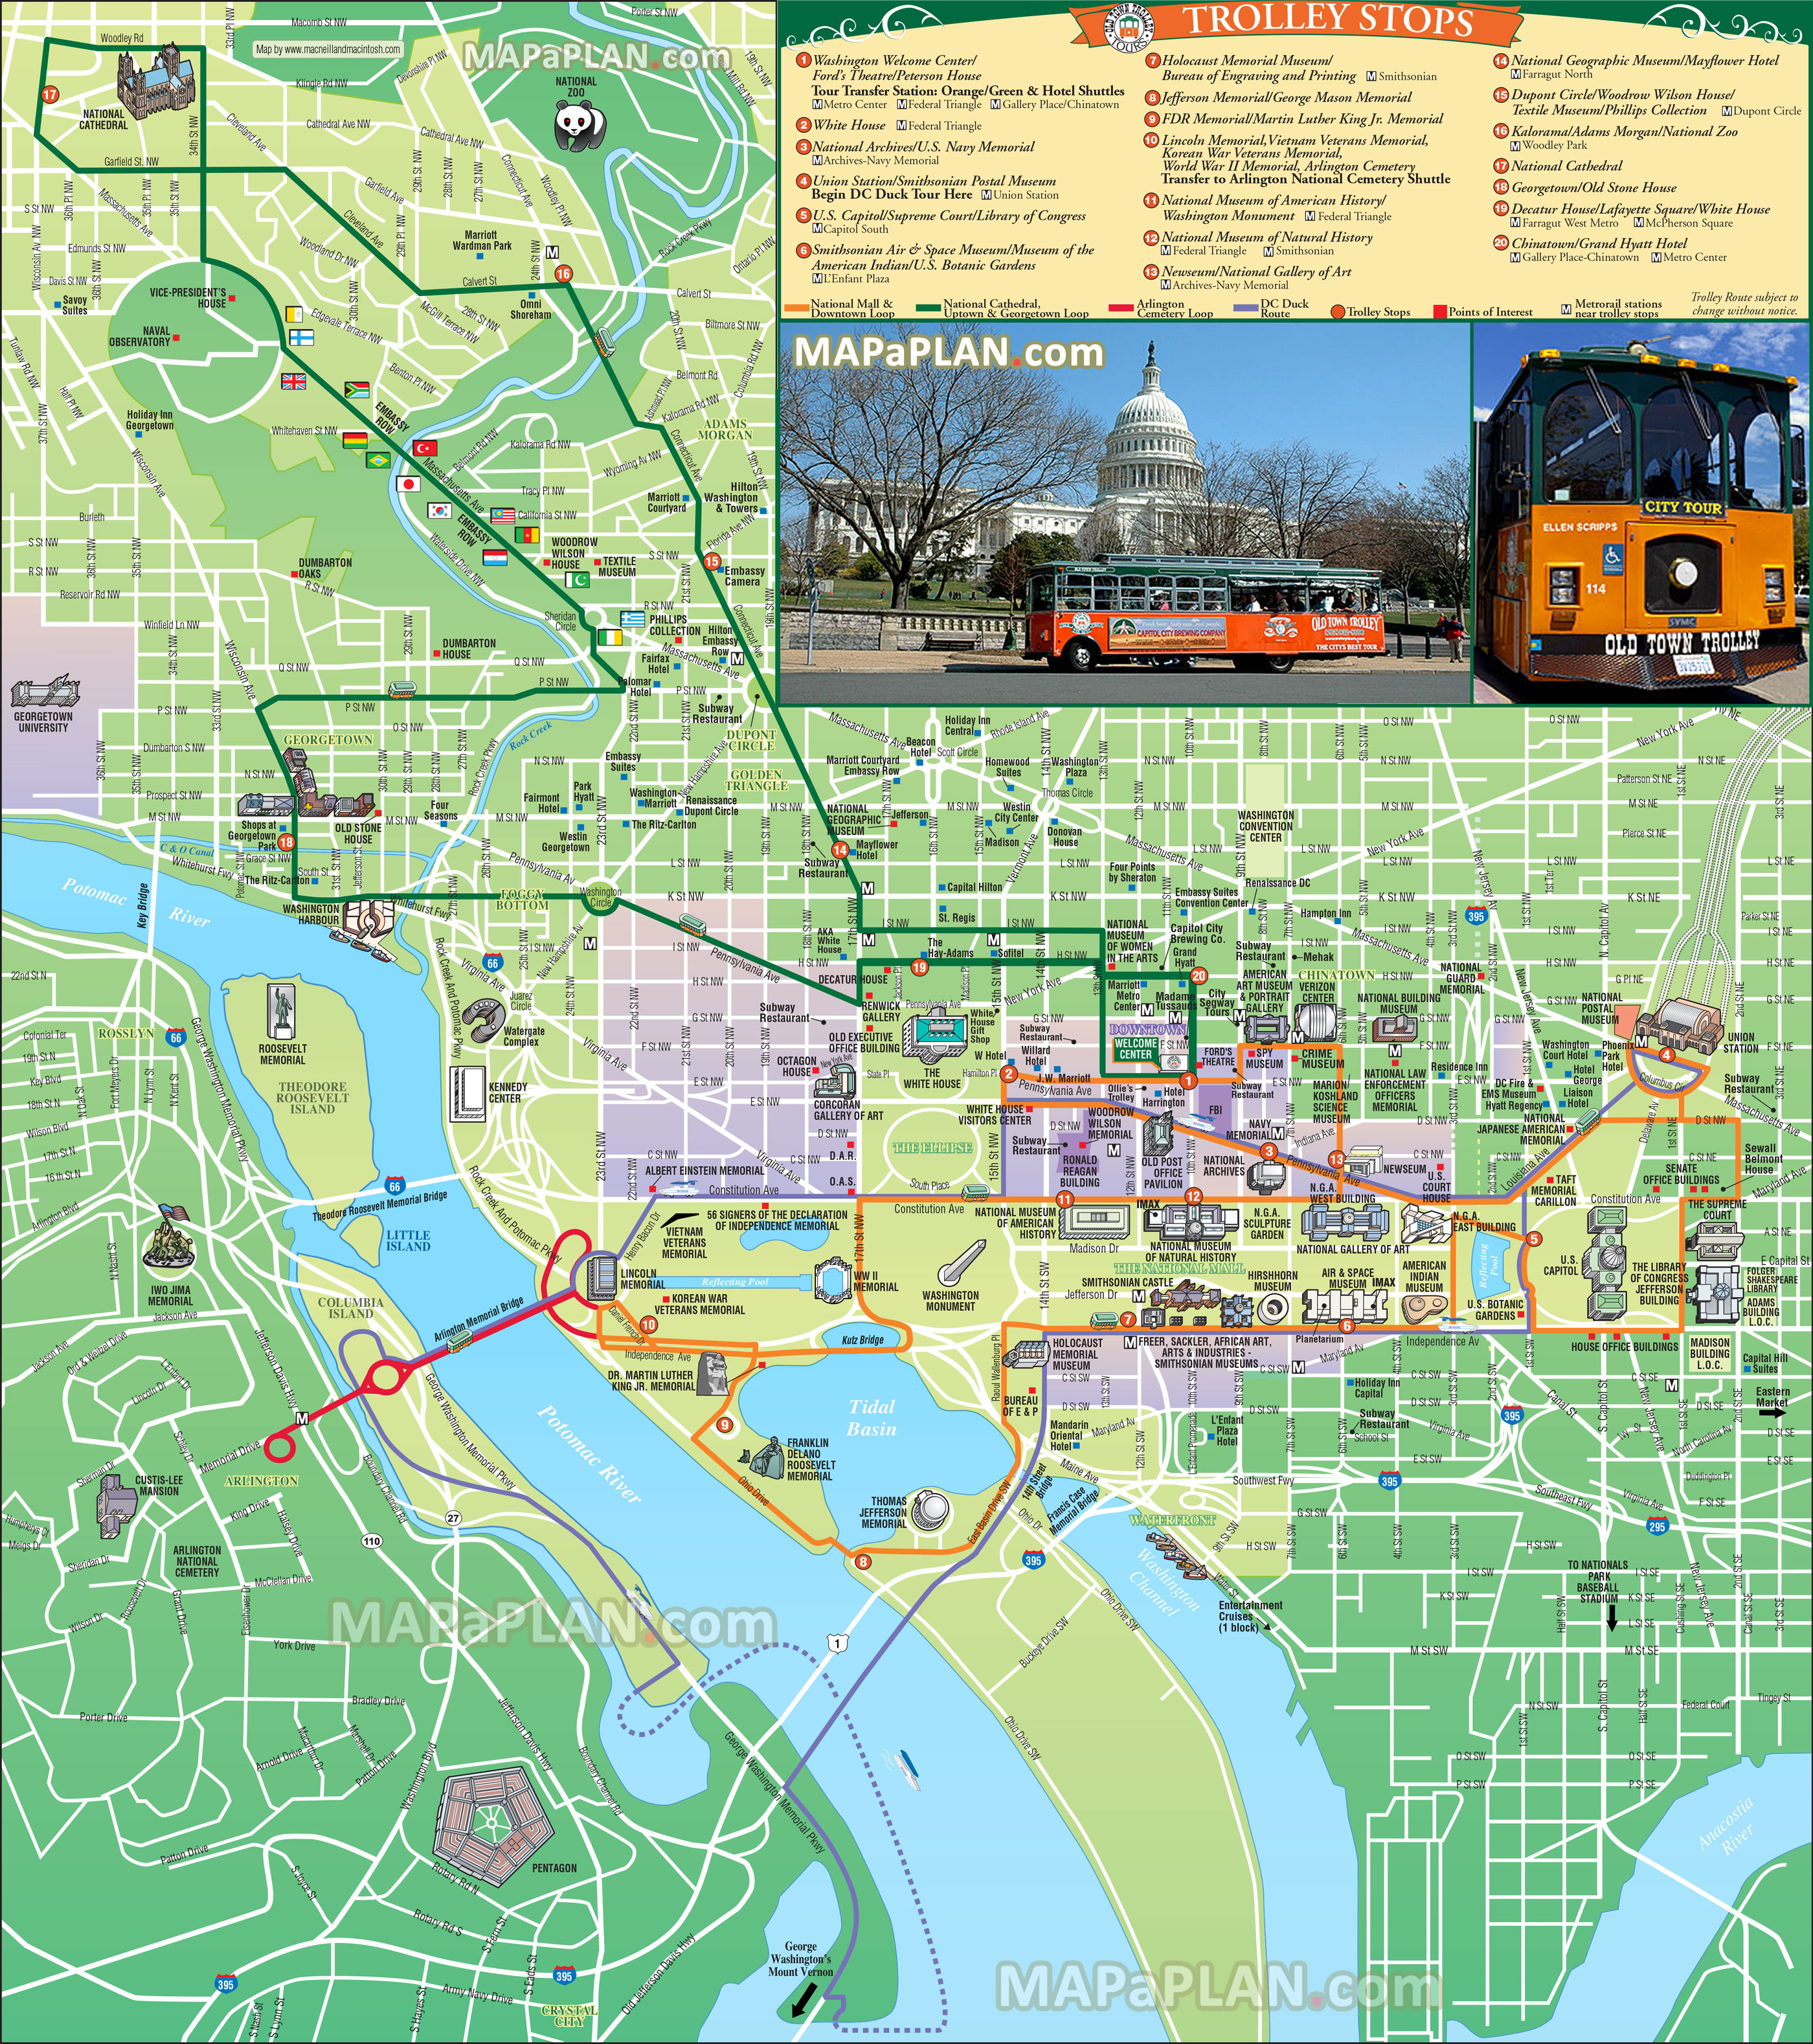 washington-dc-map-trolley-tours-stops-itinerary-planner-to-explore